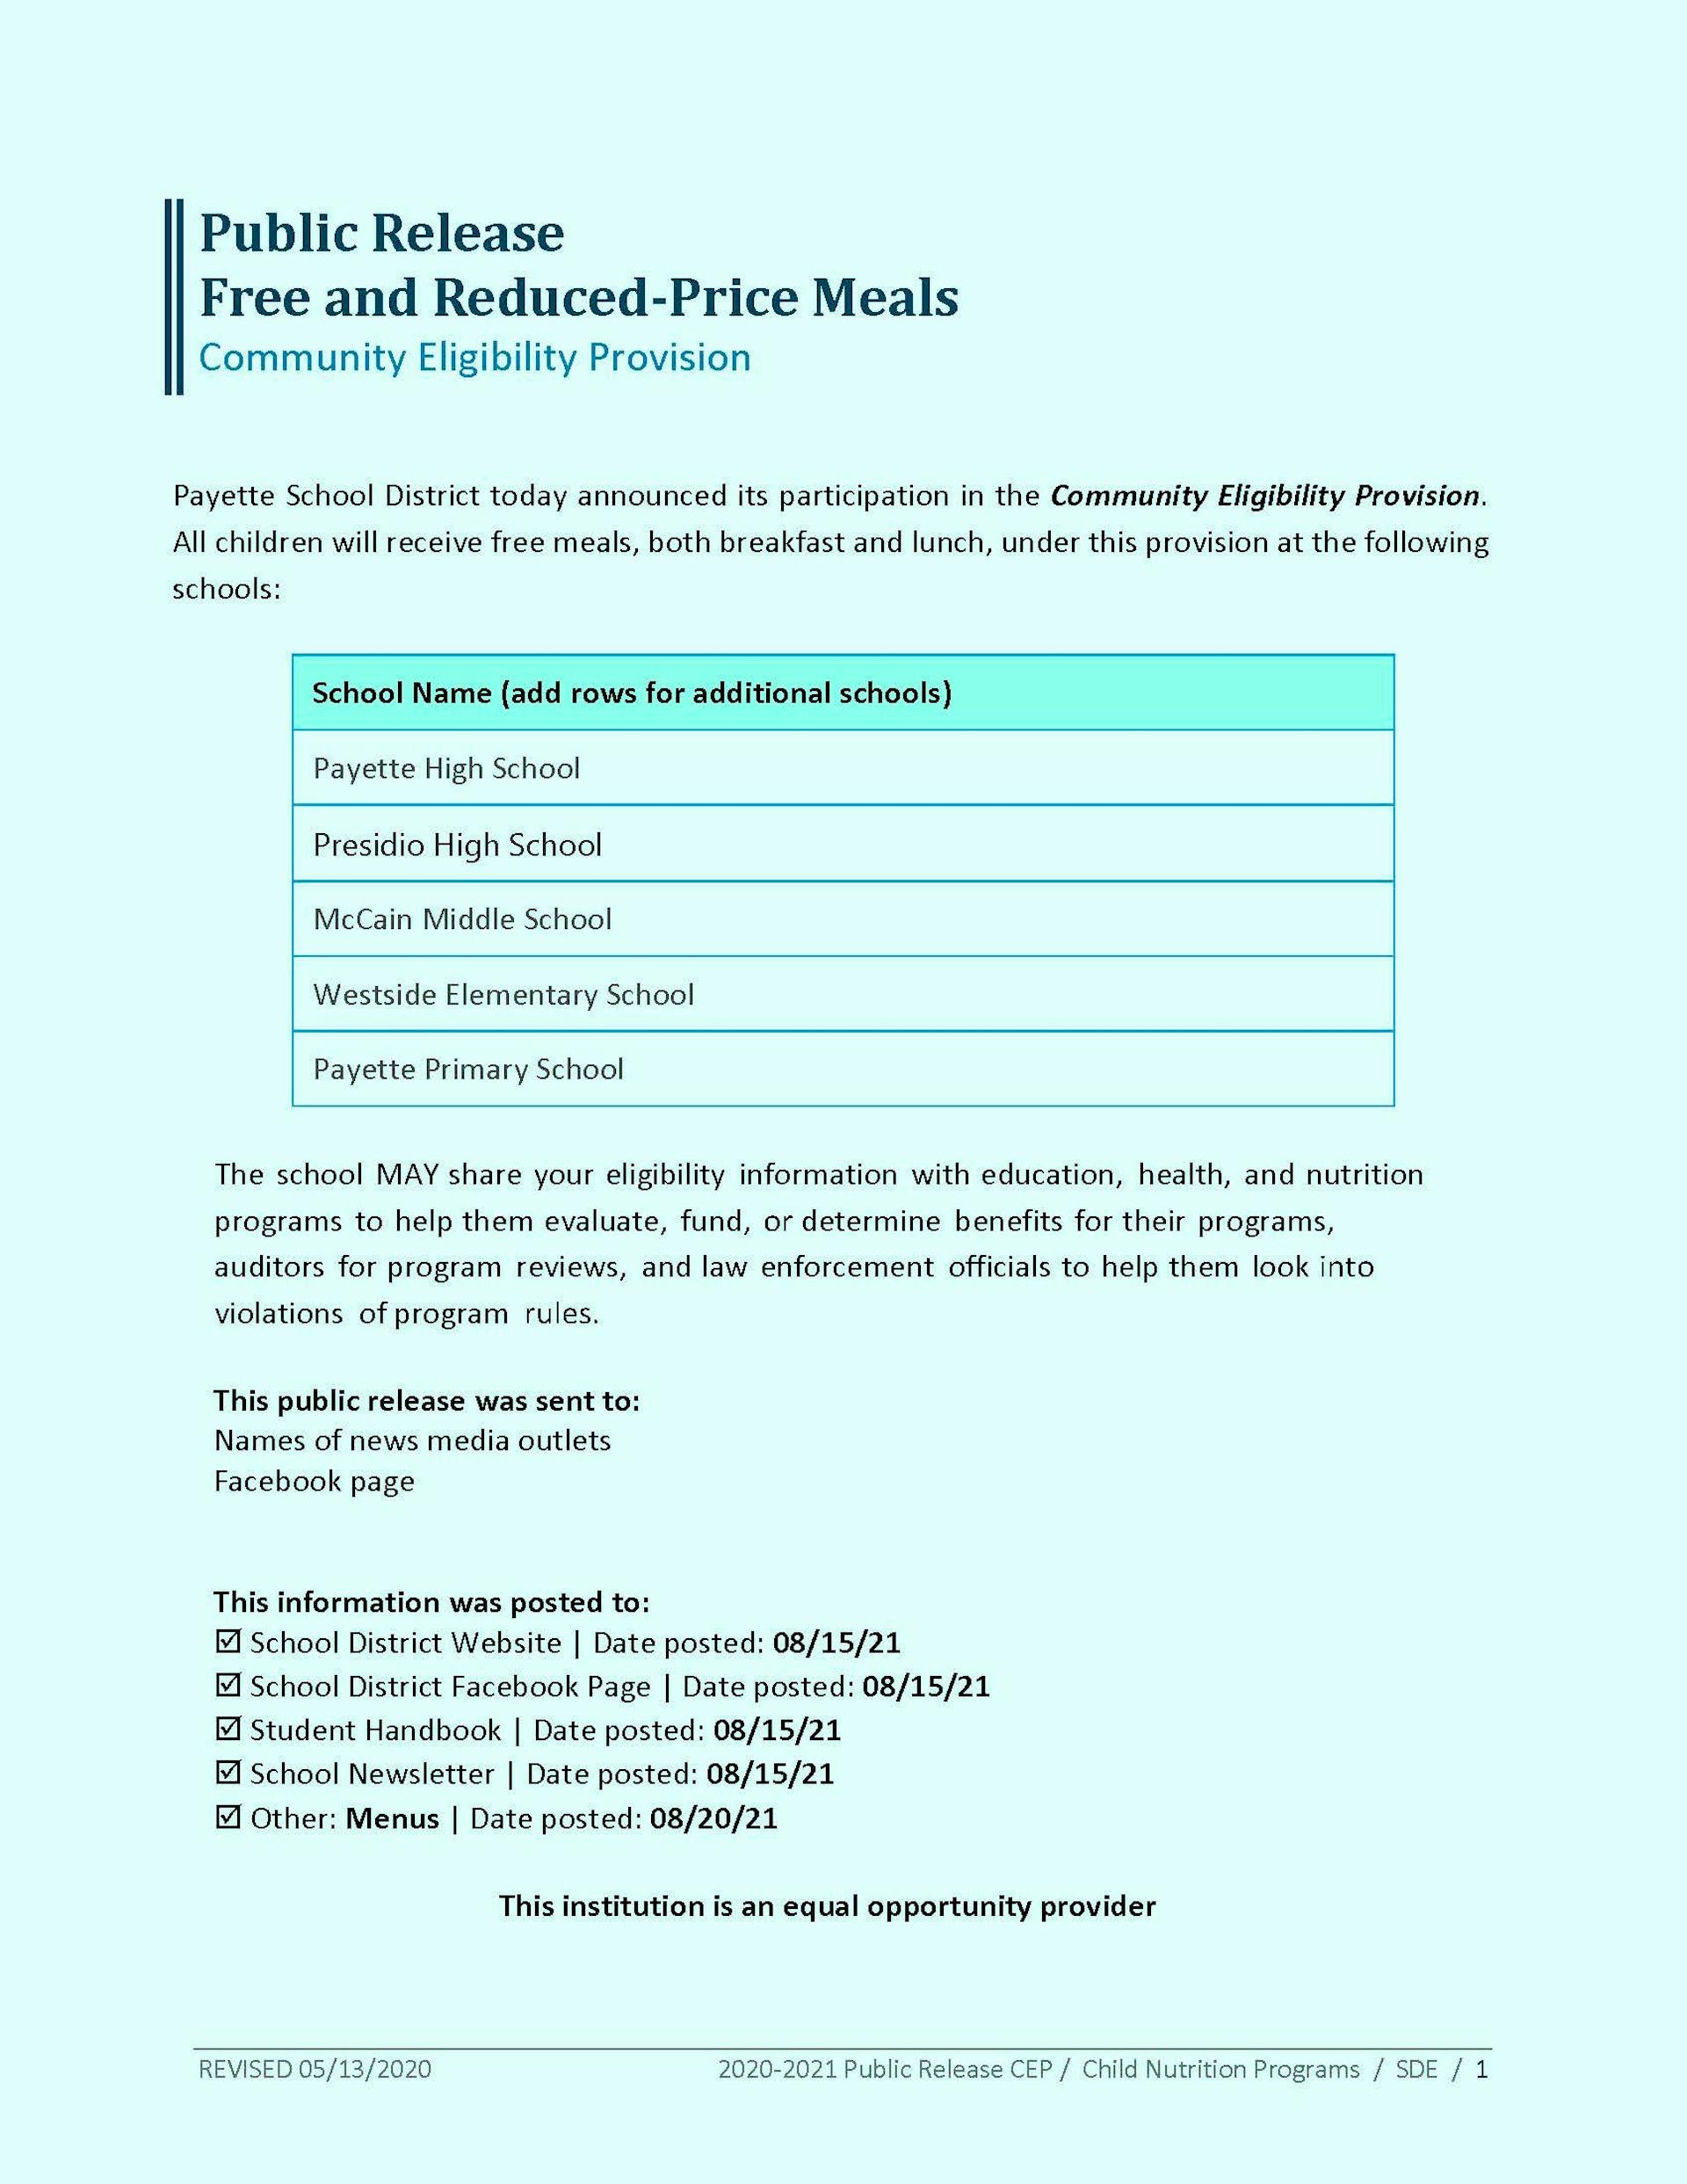  Free and Reduced Meals Public Release 